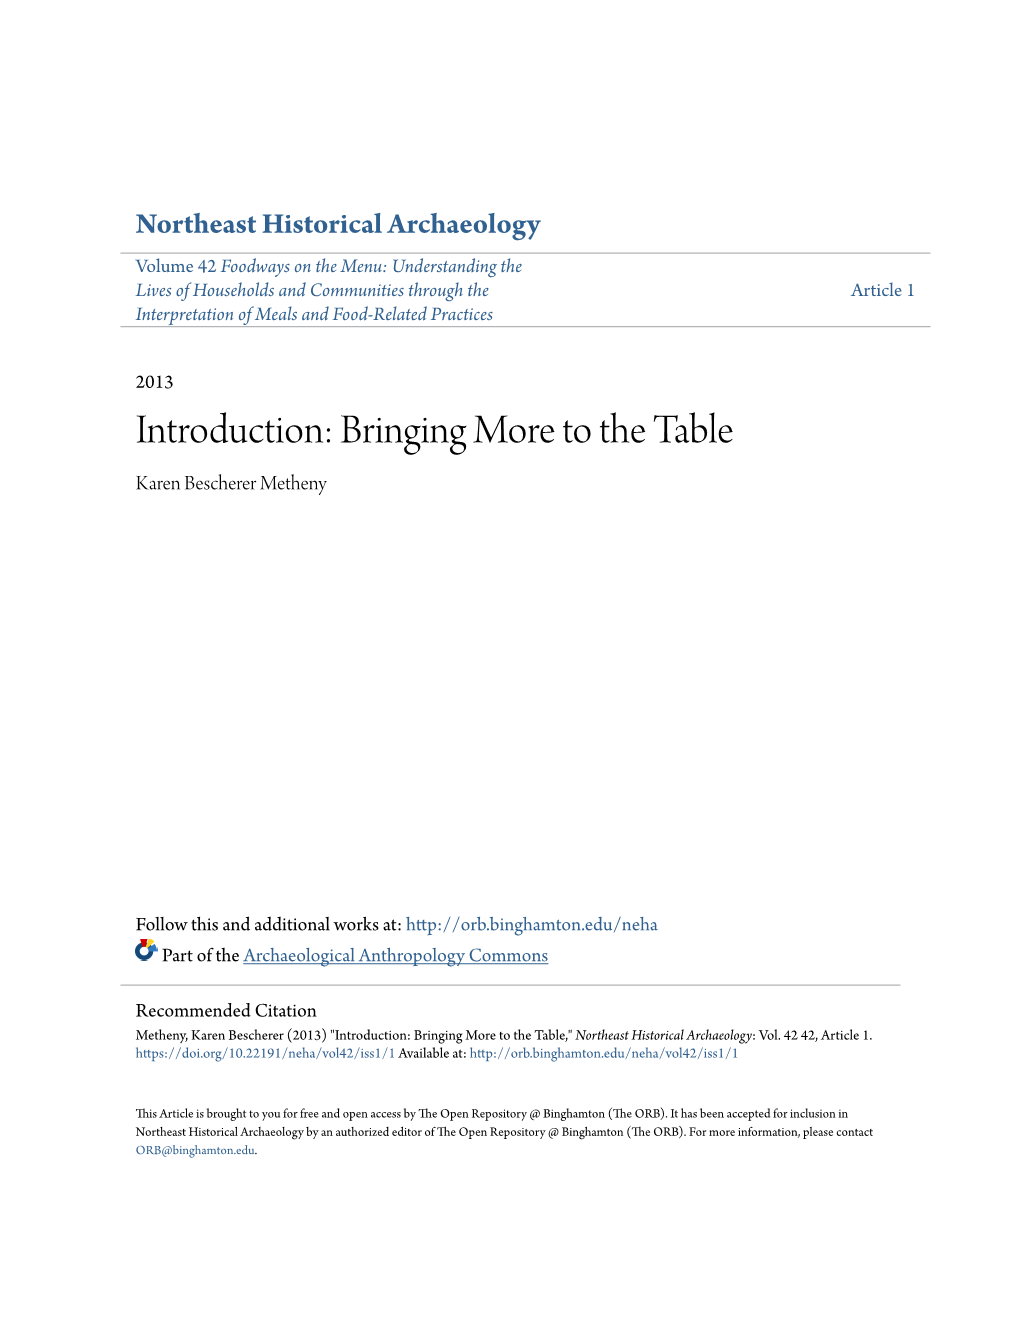 Introduction: Bringing More to the Table Karen Bescherer Metheny